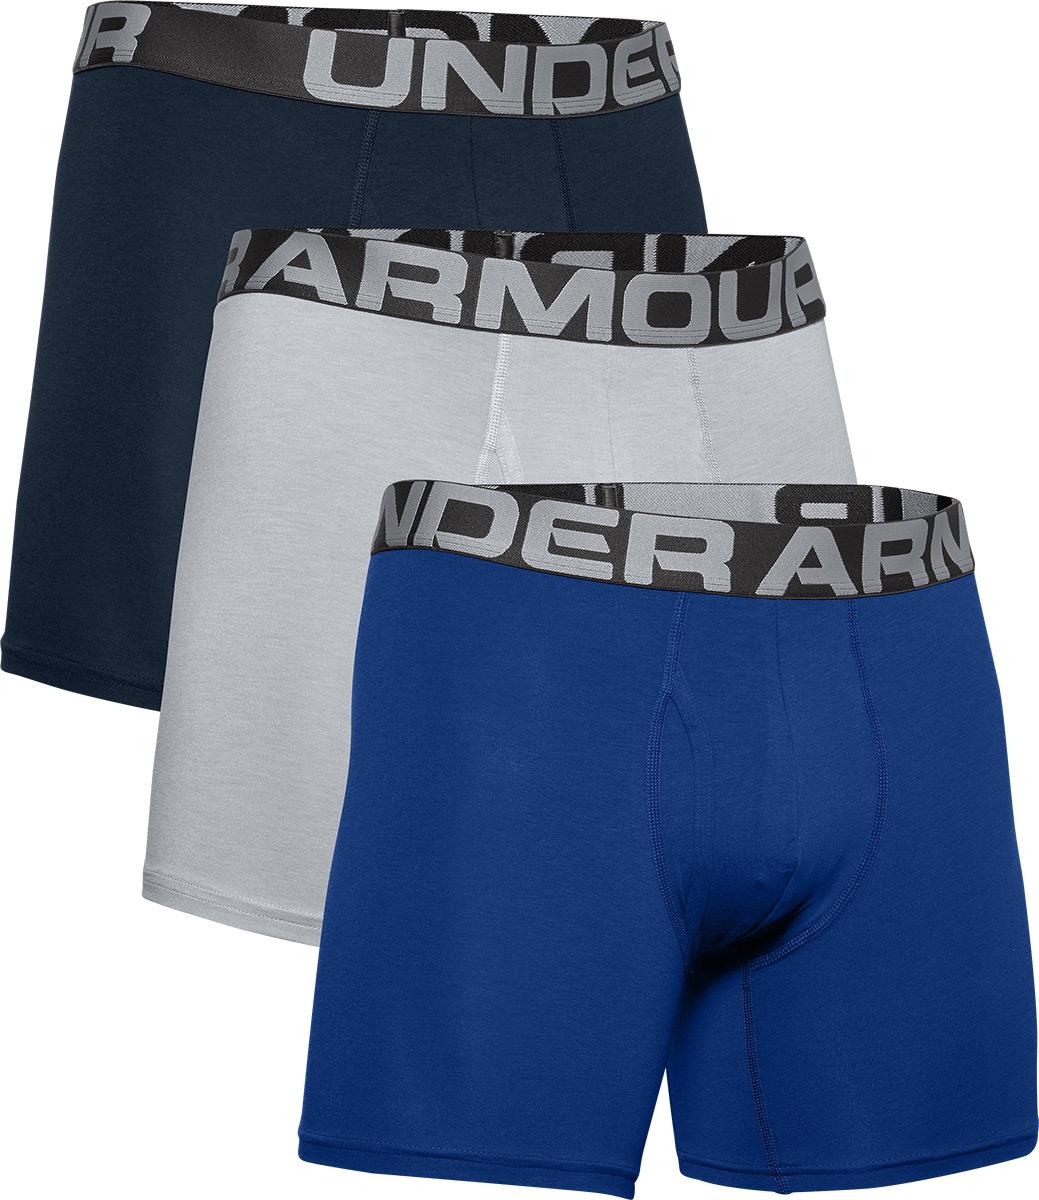 Under Armour Charged Cotton 6 Boxer 3 Pack - Royal/academy/heather